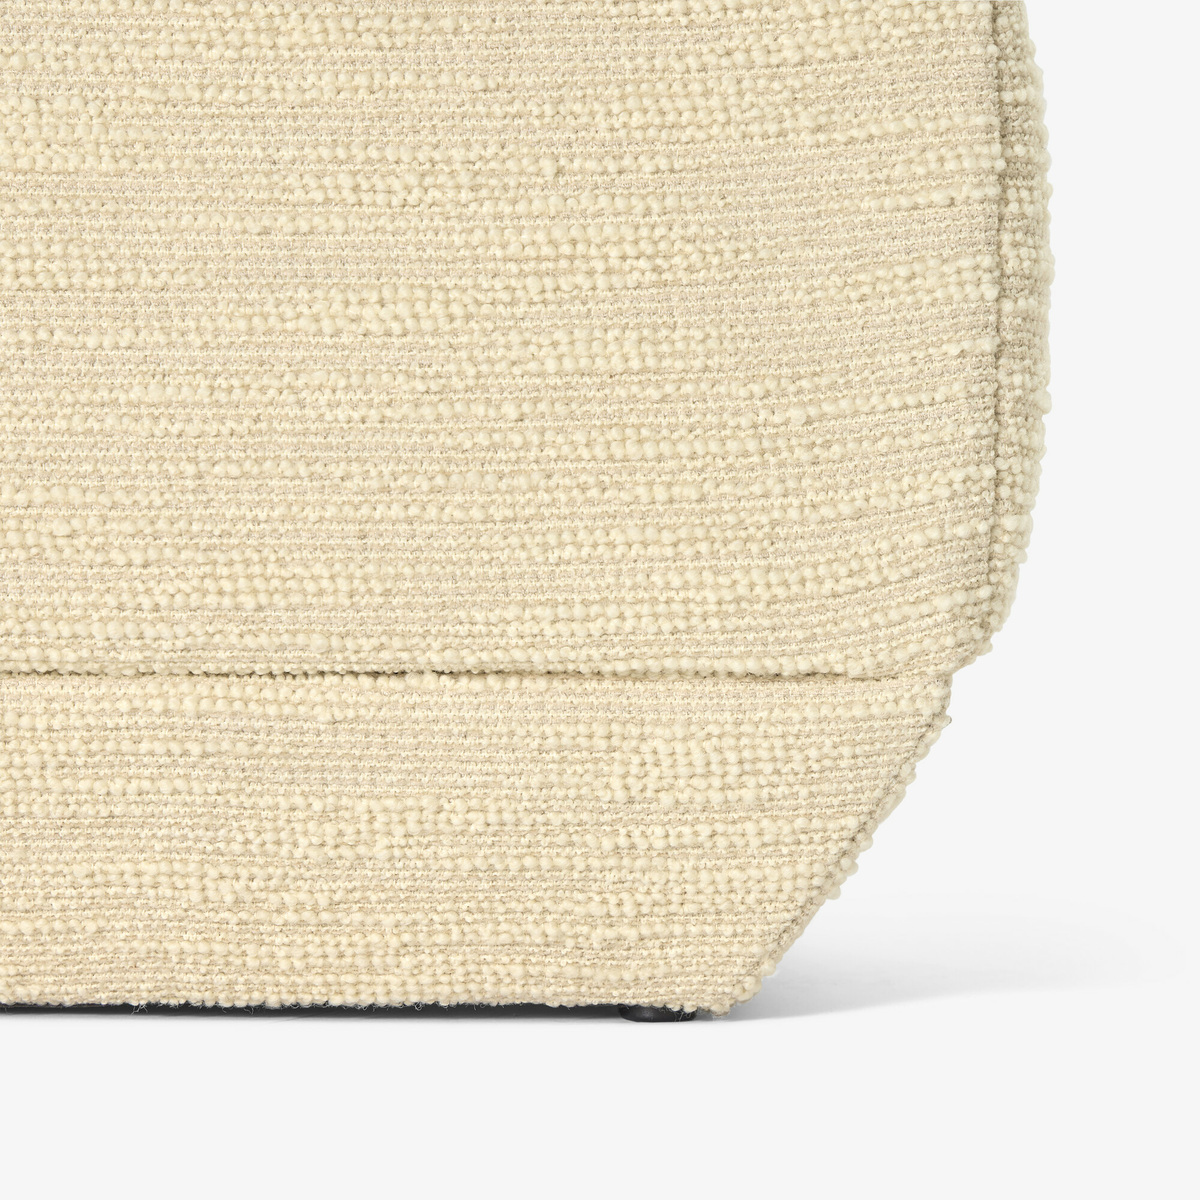 Chill Corner Armchair, Off-White - Curl fabric - image 6